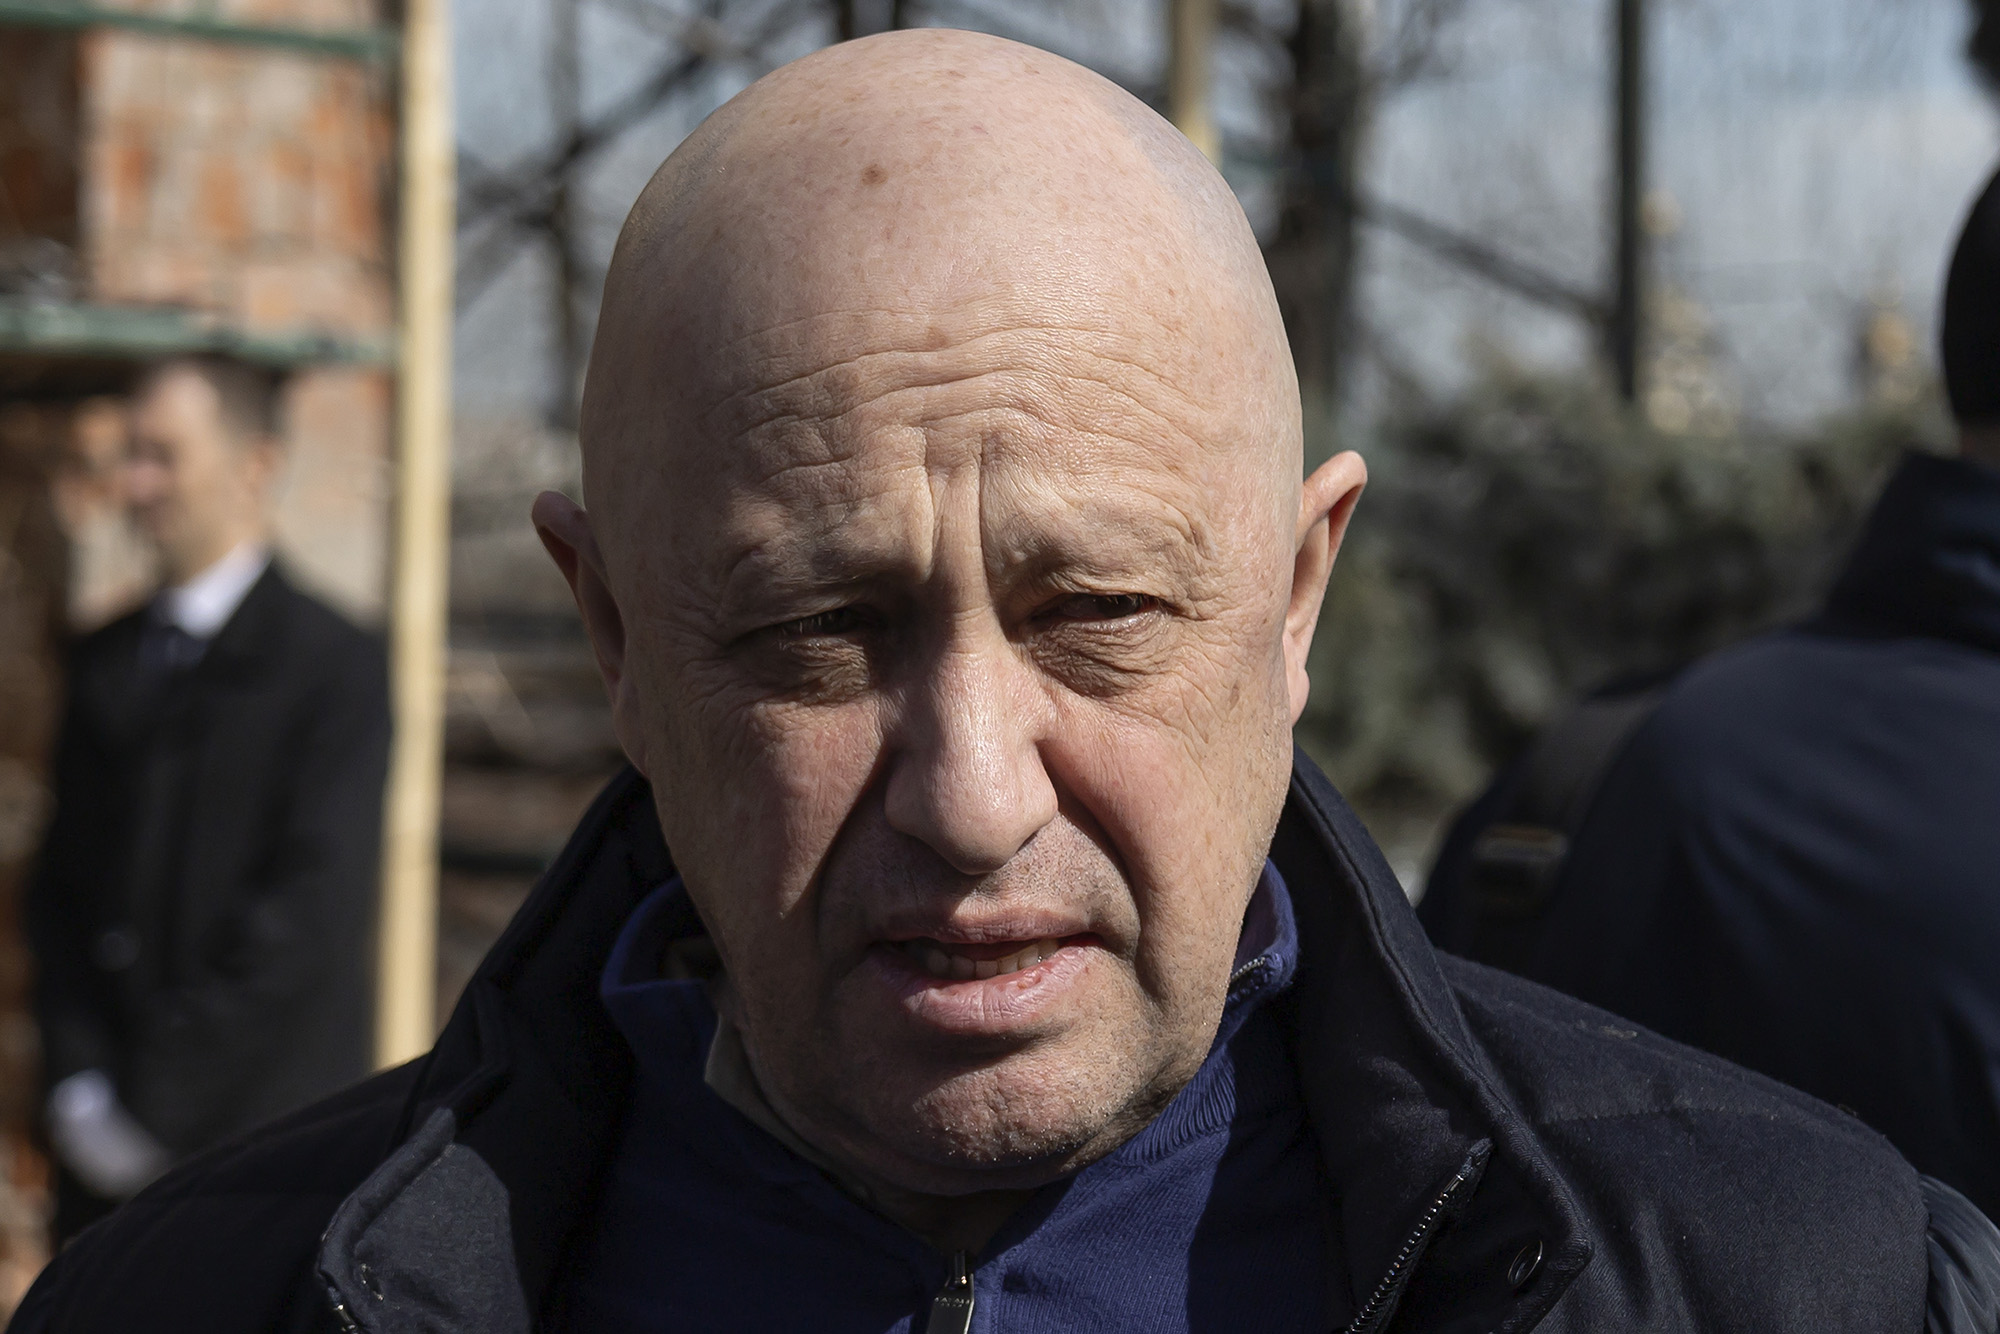 Yevgeny Prigozhin during a funeral ceremony at the Troyekurovskoye cemetery in Moscow, Russia, on April 8.